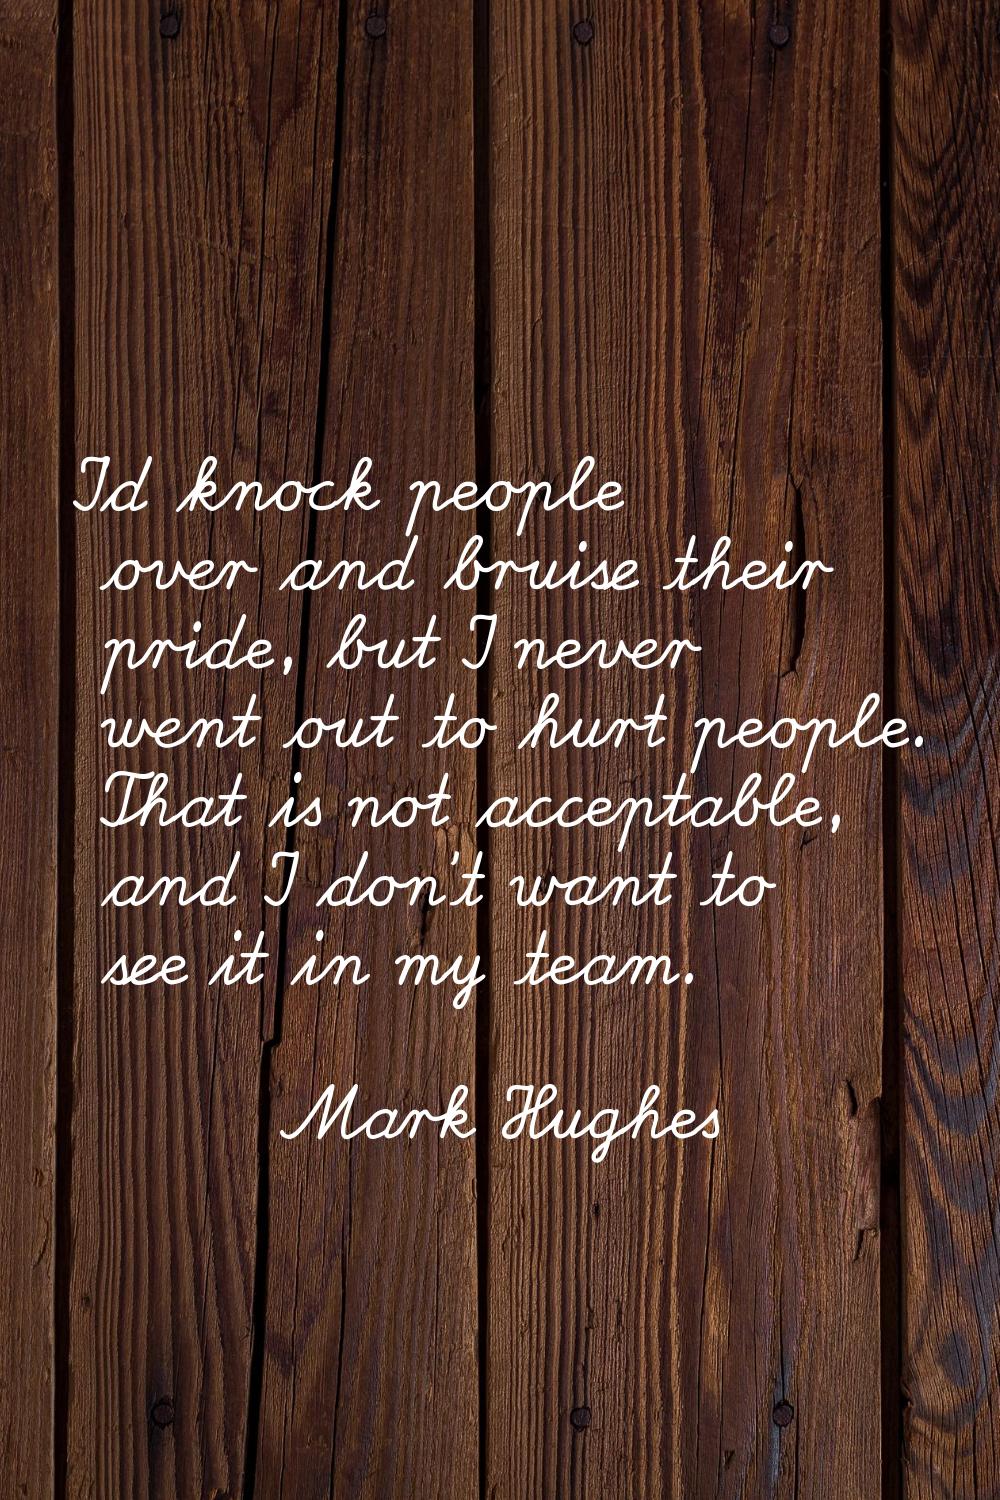 I'd knock people over and bruise their pride, but I never went out to hurt people. That is not acce